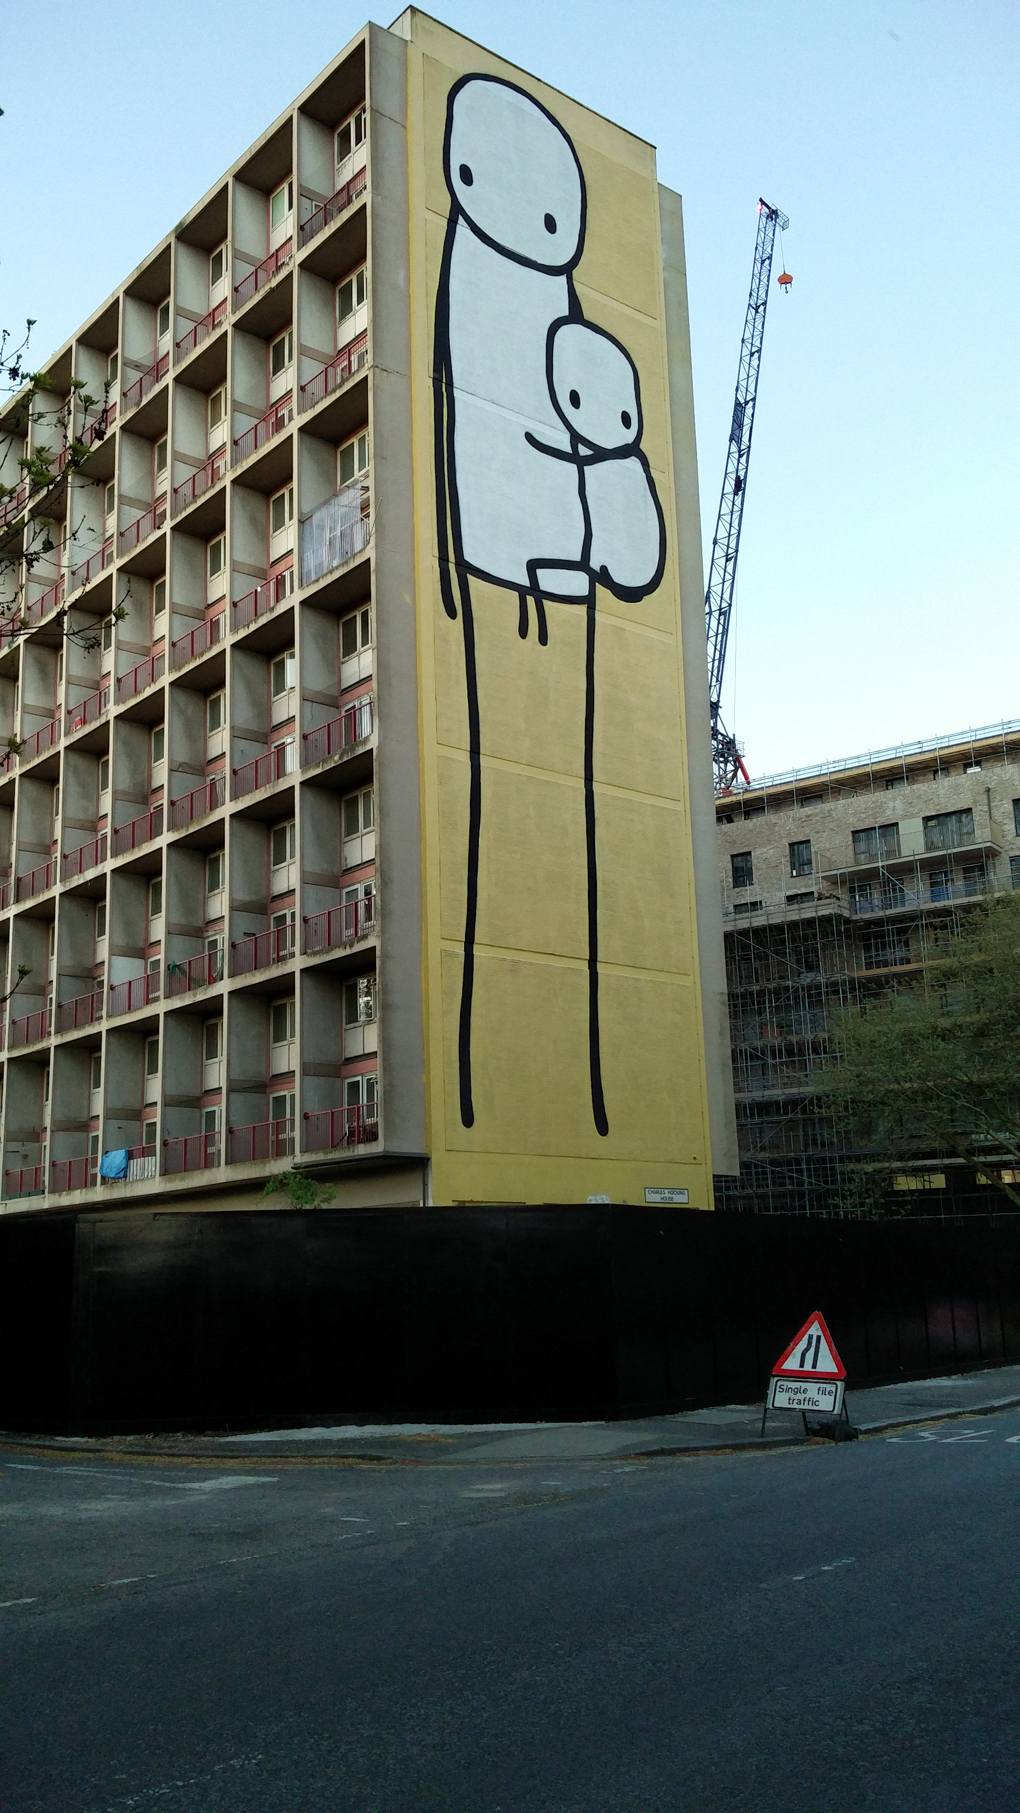 giant stick men on the side of a building